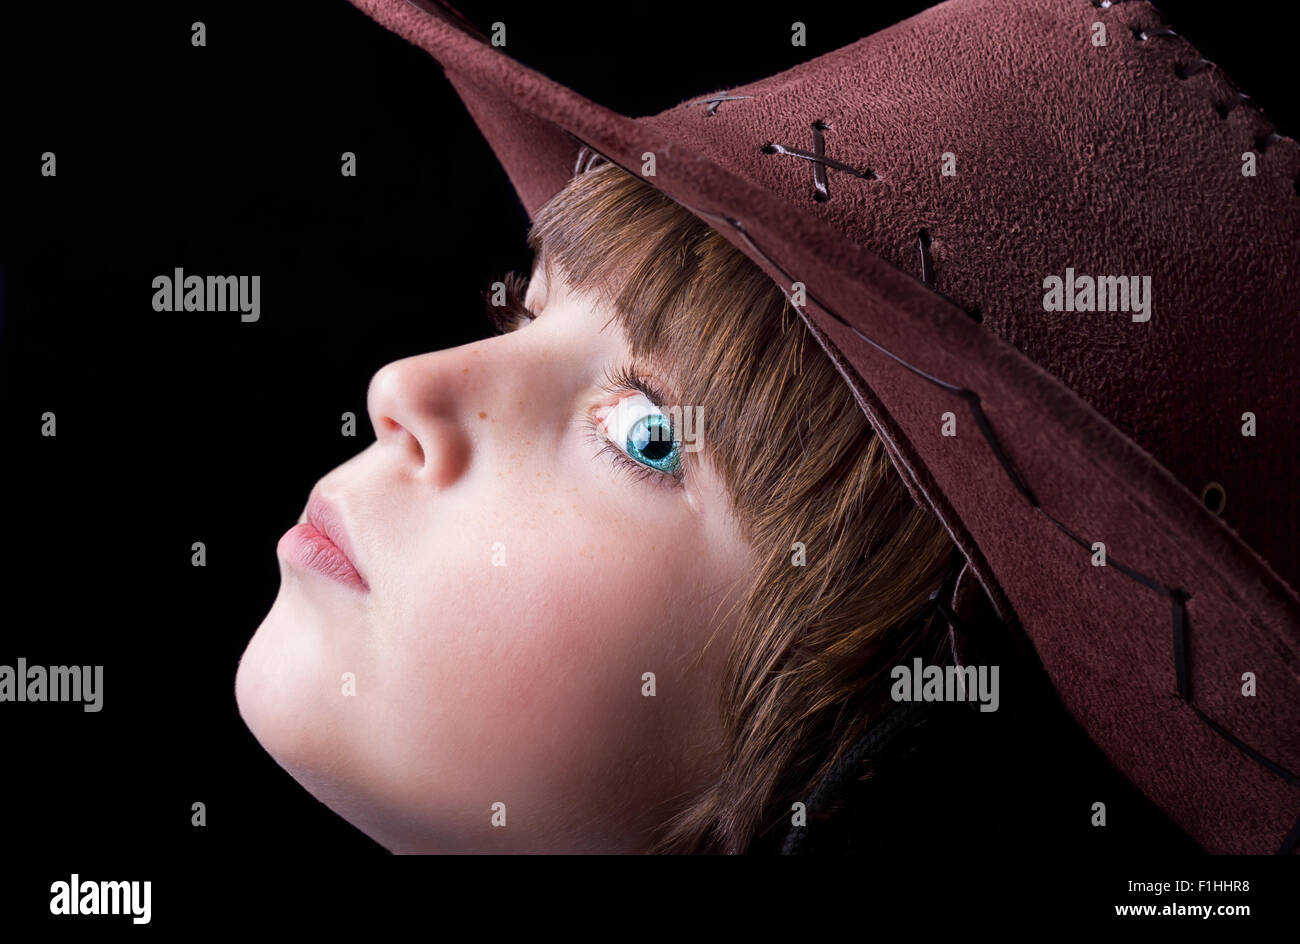 Cute freckle faced boy wearing a cowboy hat. Stock Photo